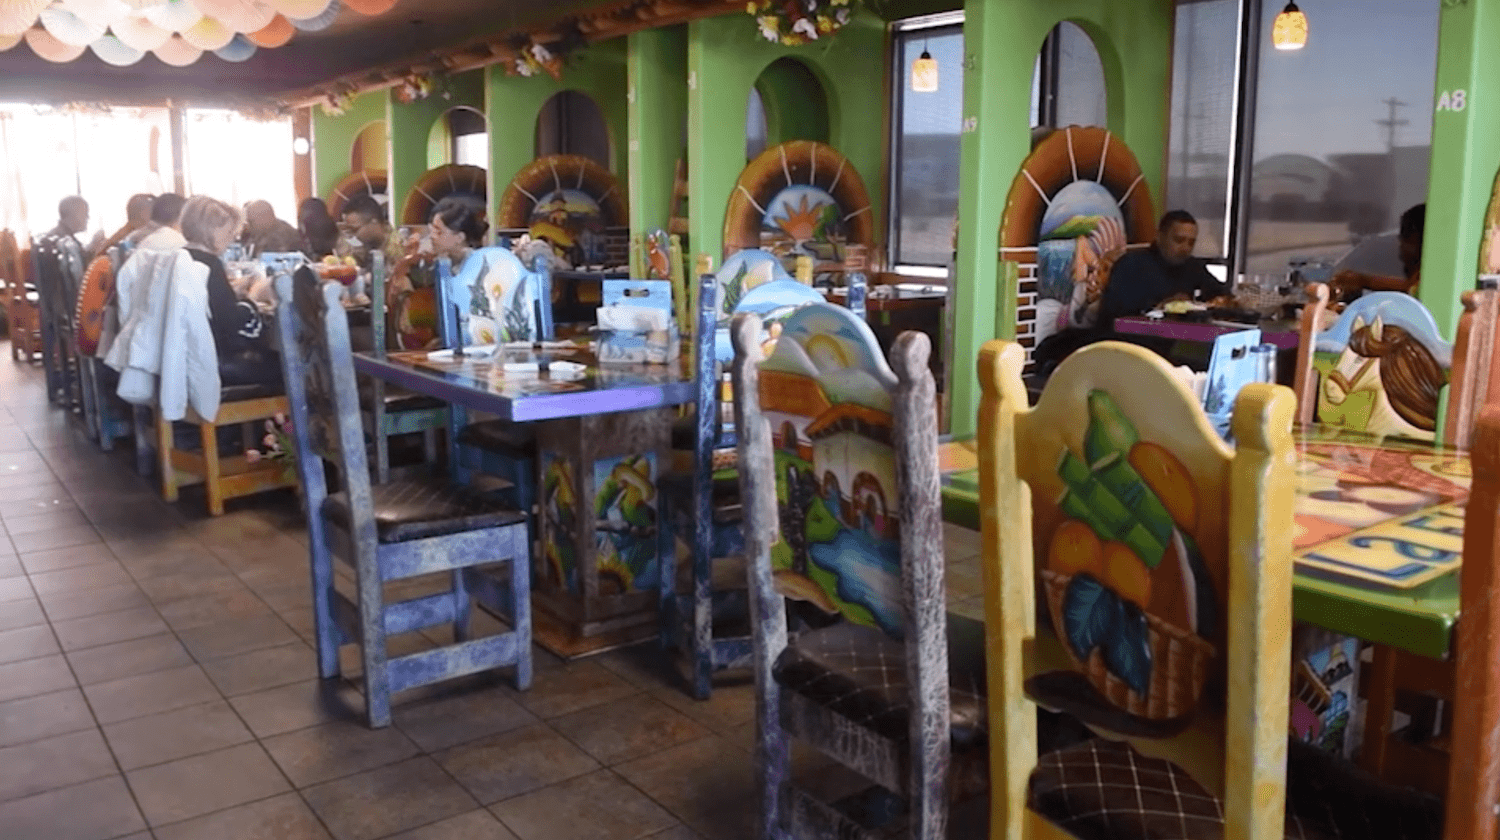 Tables and Chairs inside La Fiesta